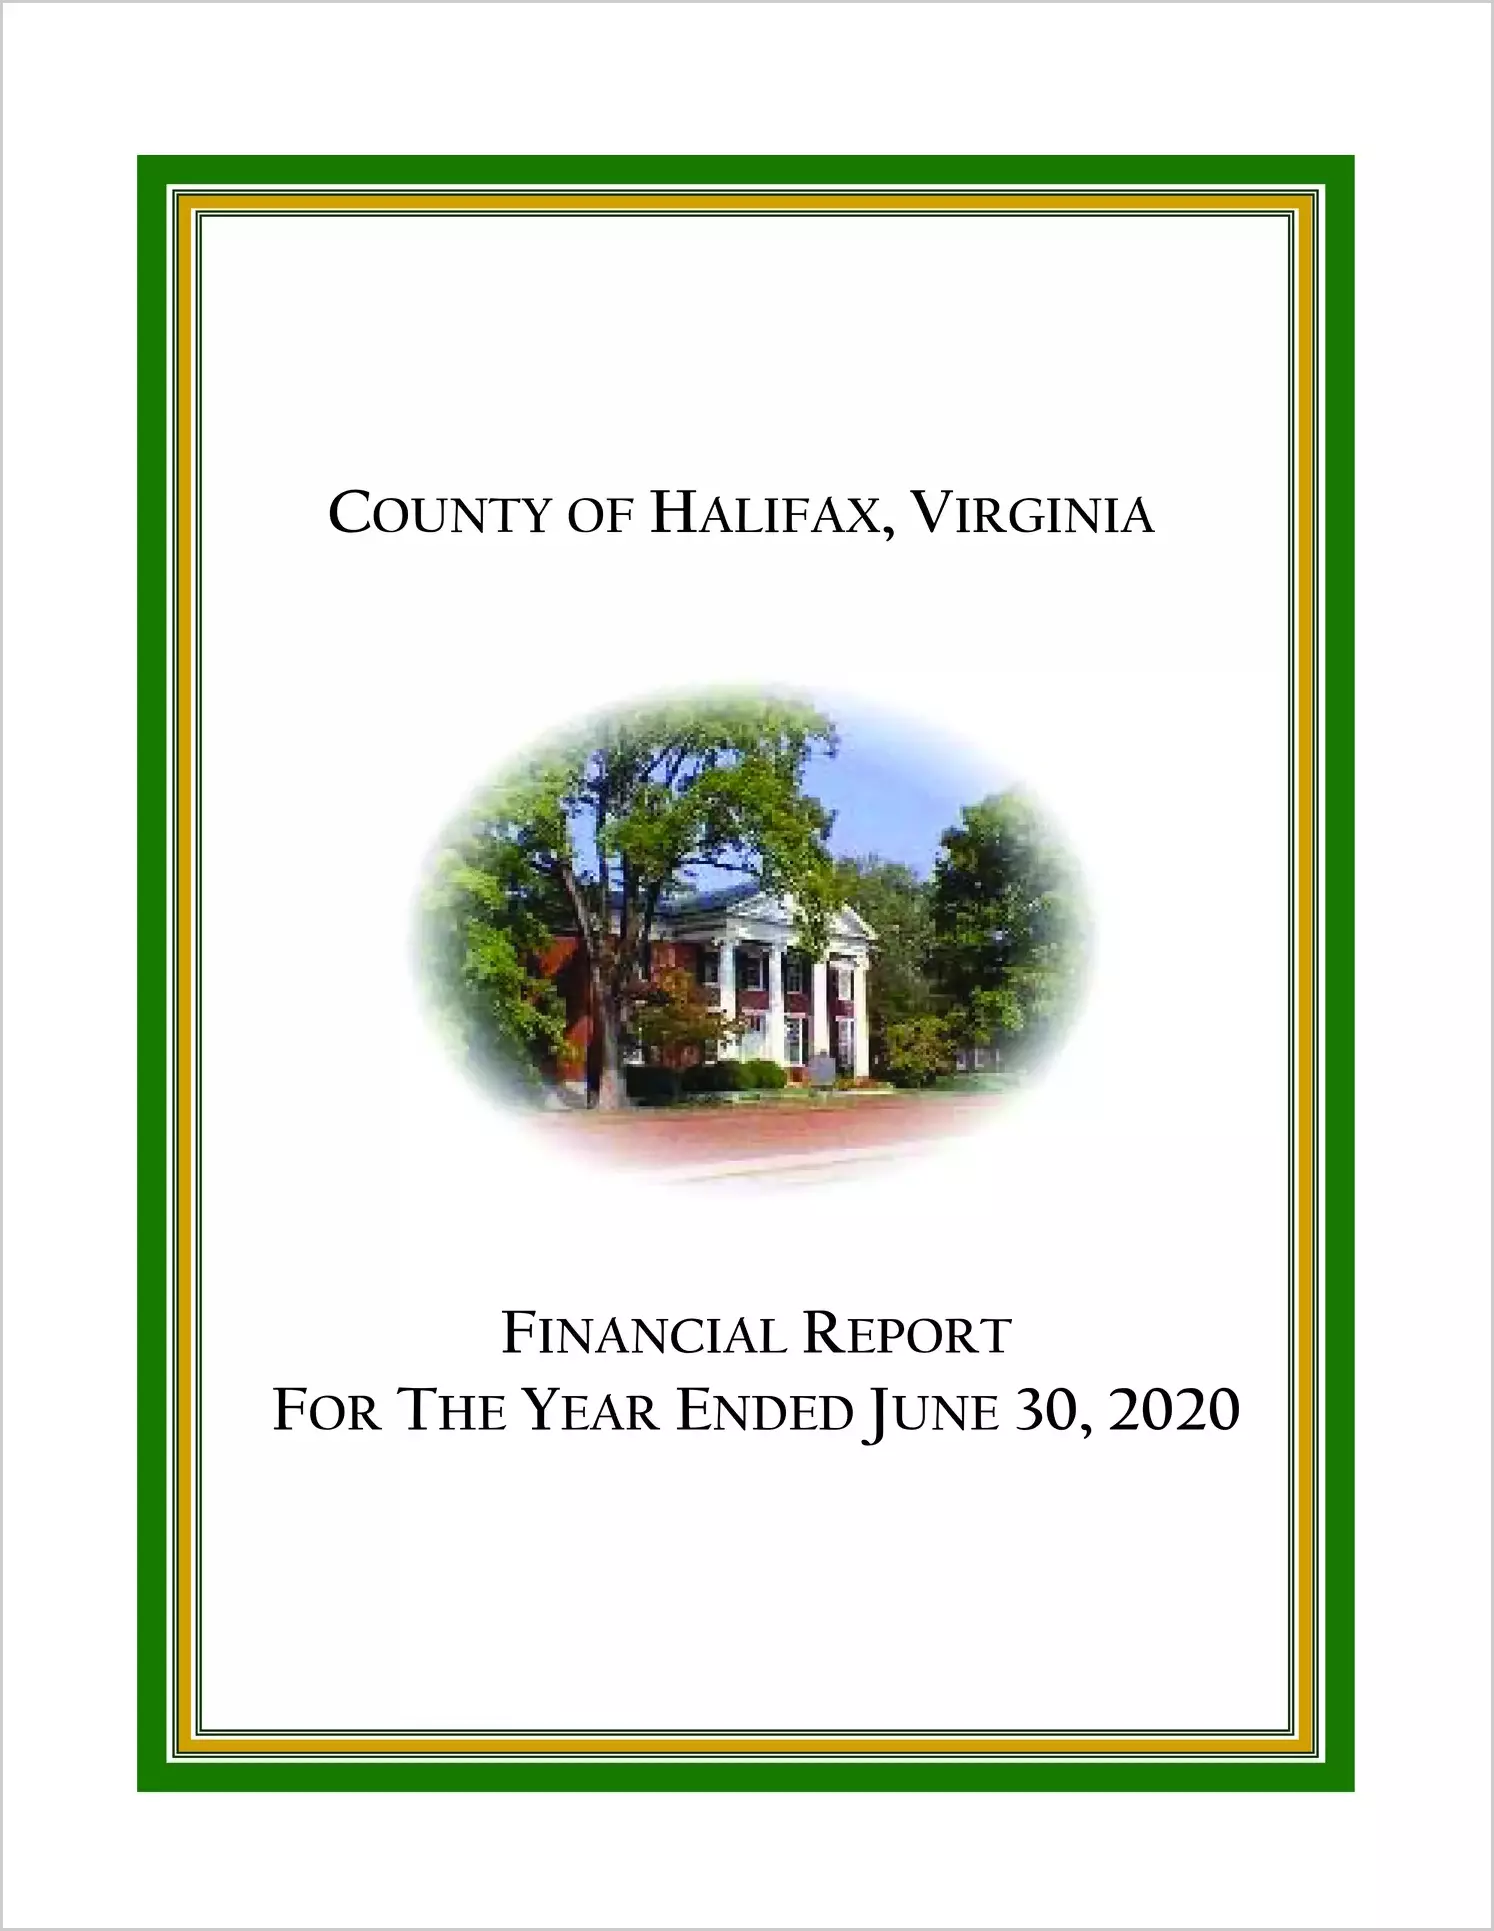 2020 Annual Financial Report for County of Halifax